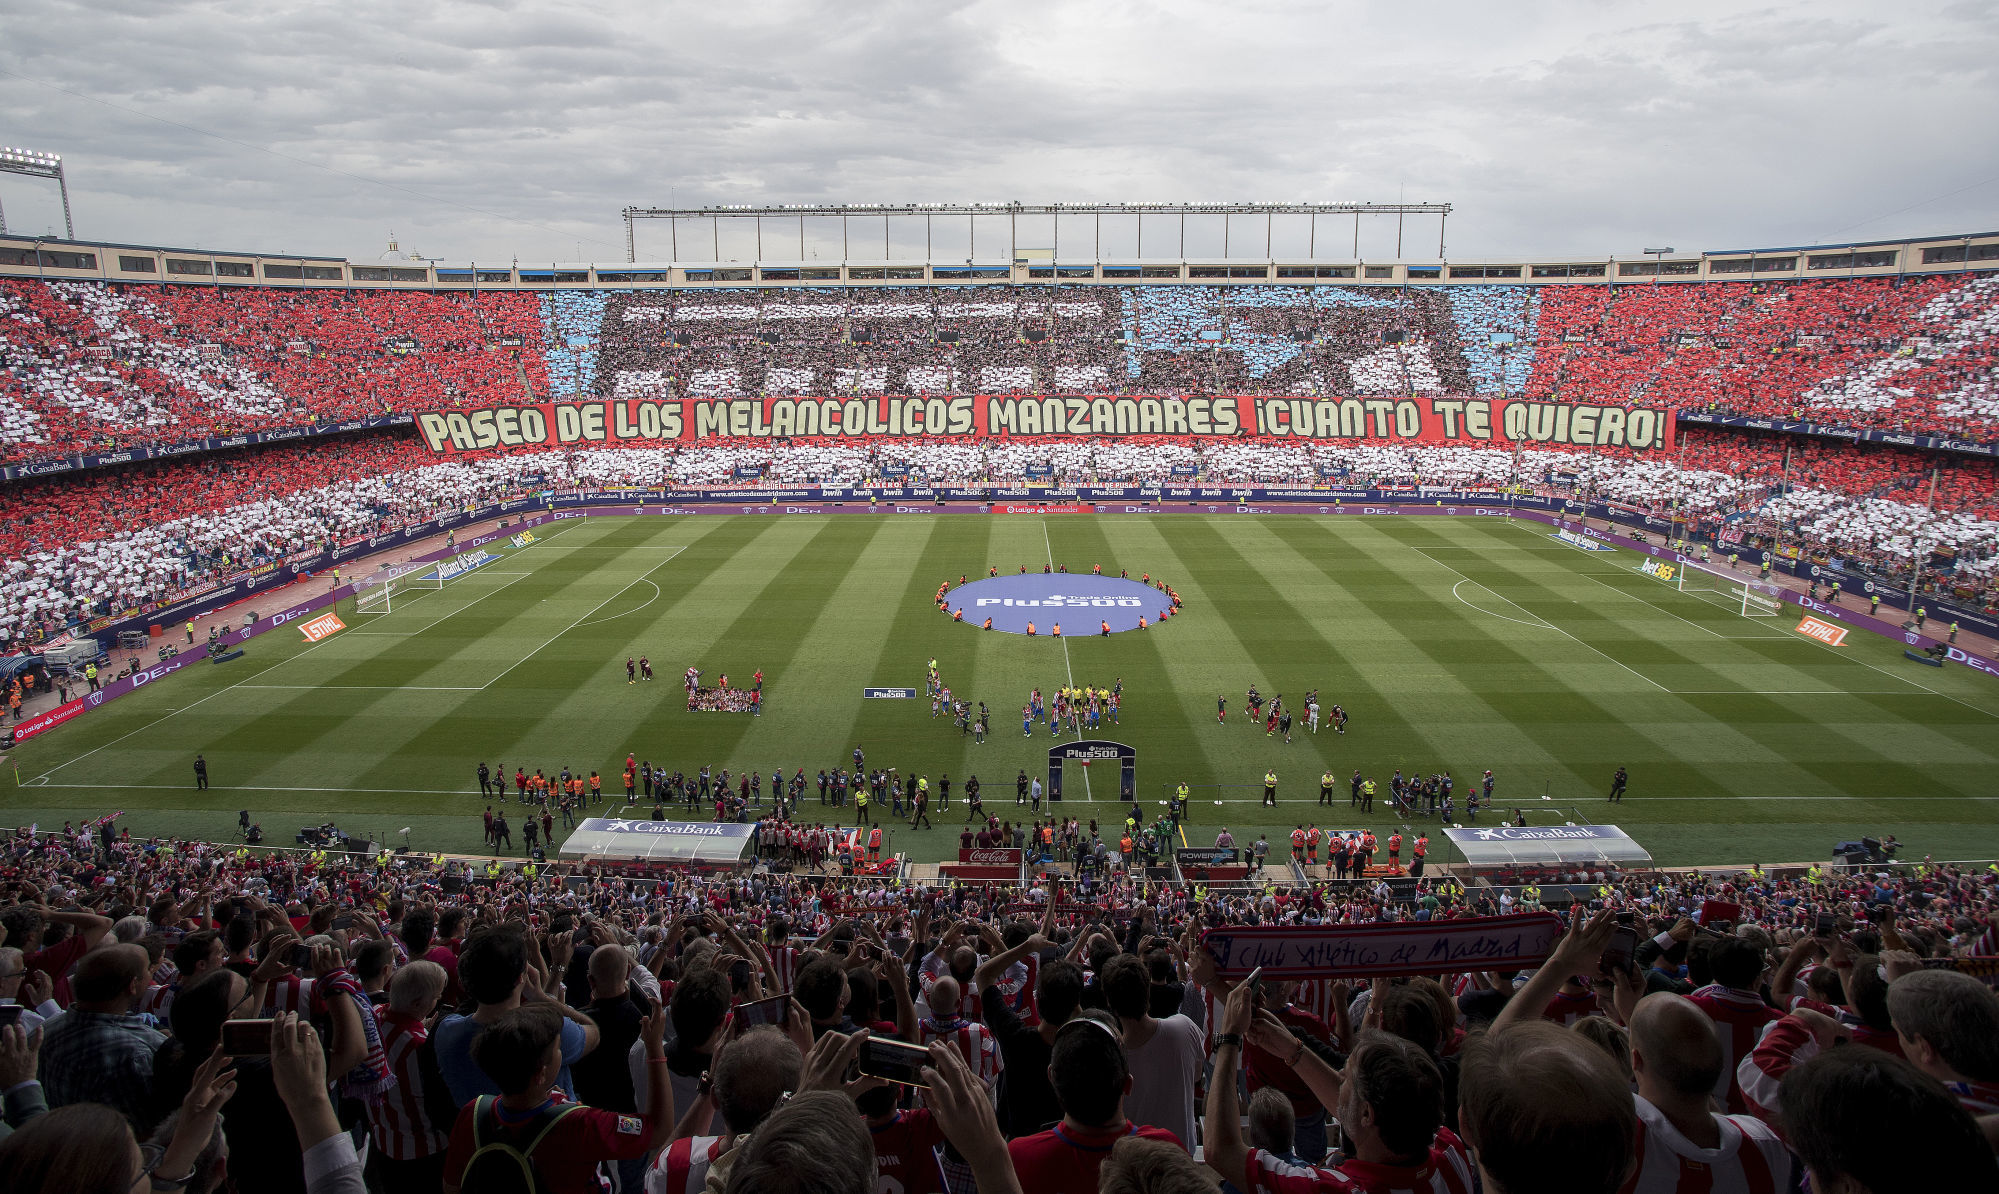 Illustration Vicente Calderon during the Liga match between Atletico and Athletic on 21th May 2017
Photo